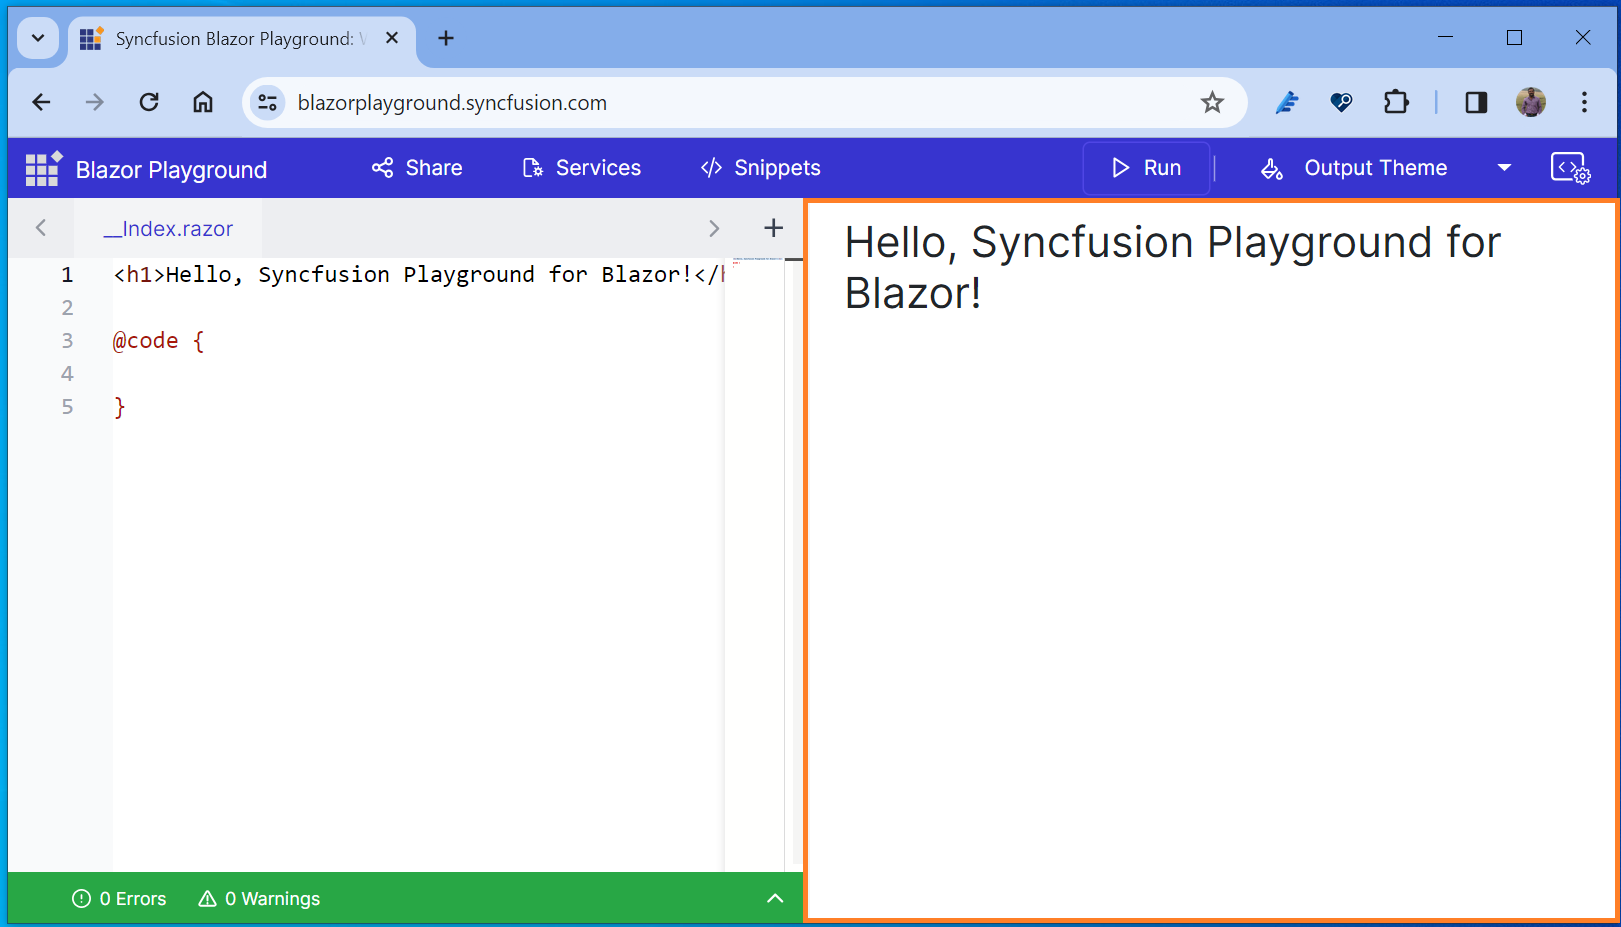 Real-time preview window in the Blazor Playground app